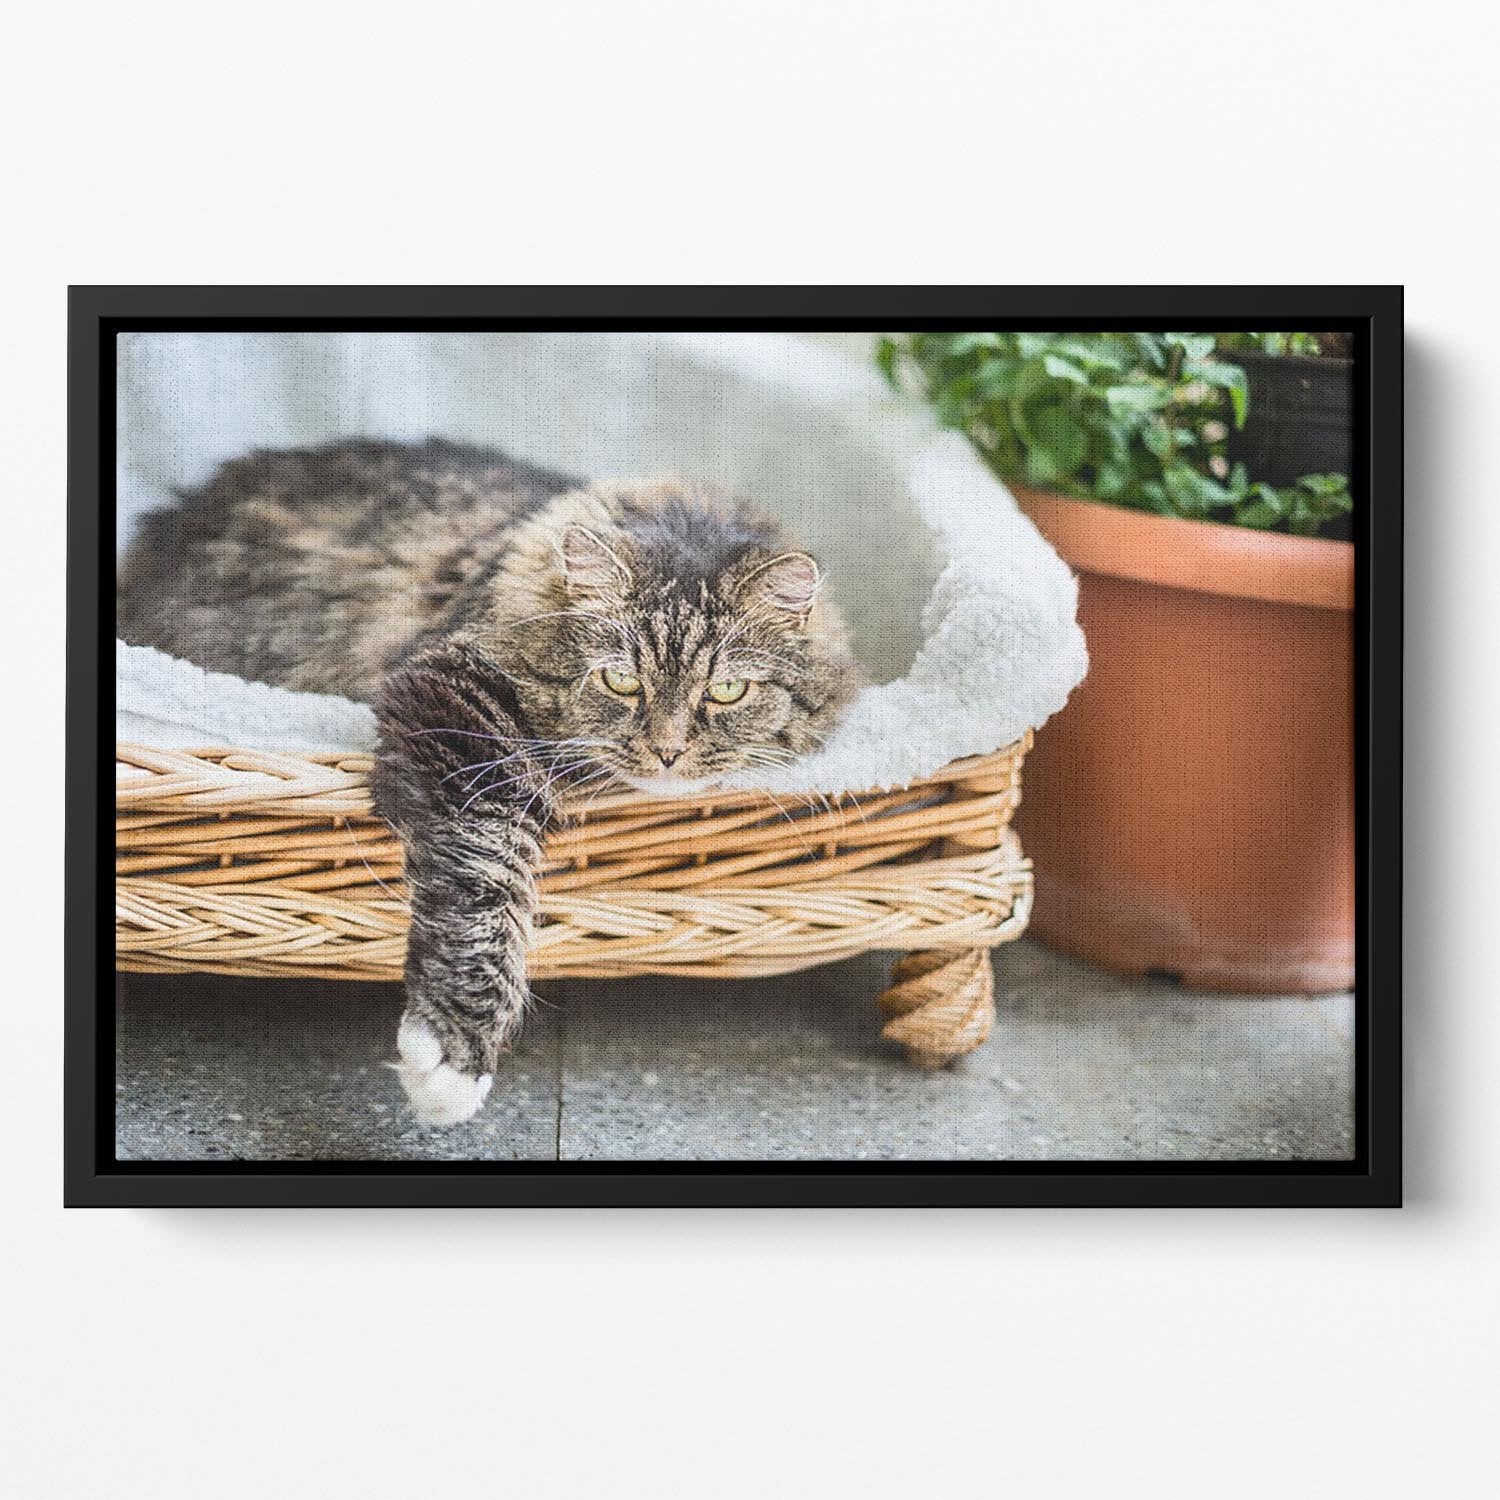 Big fluffy cat lying in wicker chaise sofa couch on balcony or garden terrace with flowers pot Floating Framed Canvas - Canvas Art Rocks - 2